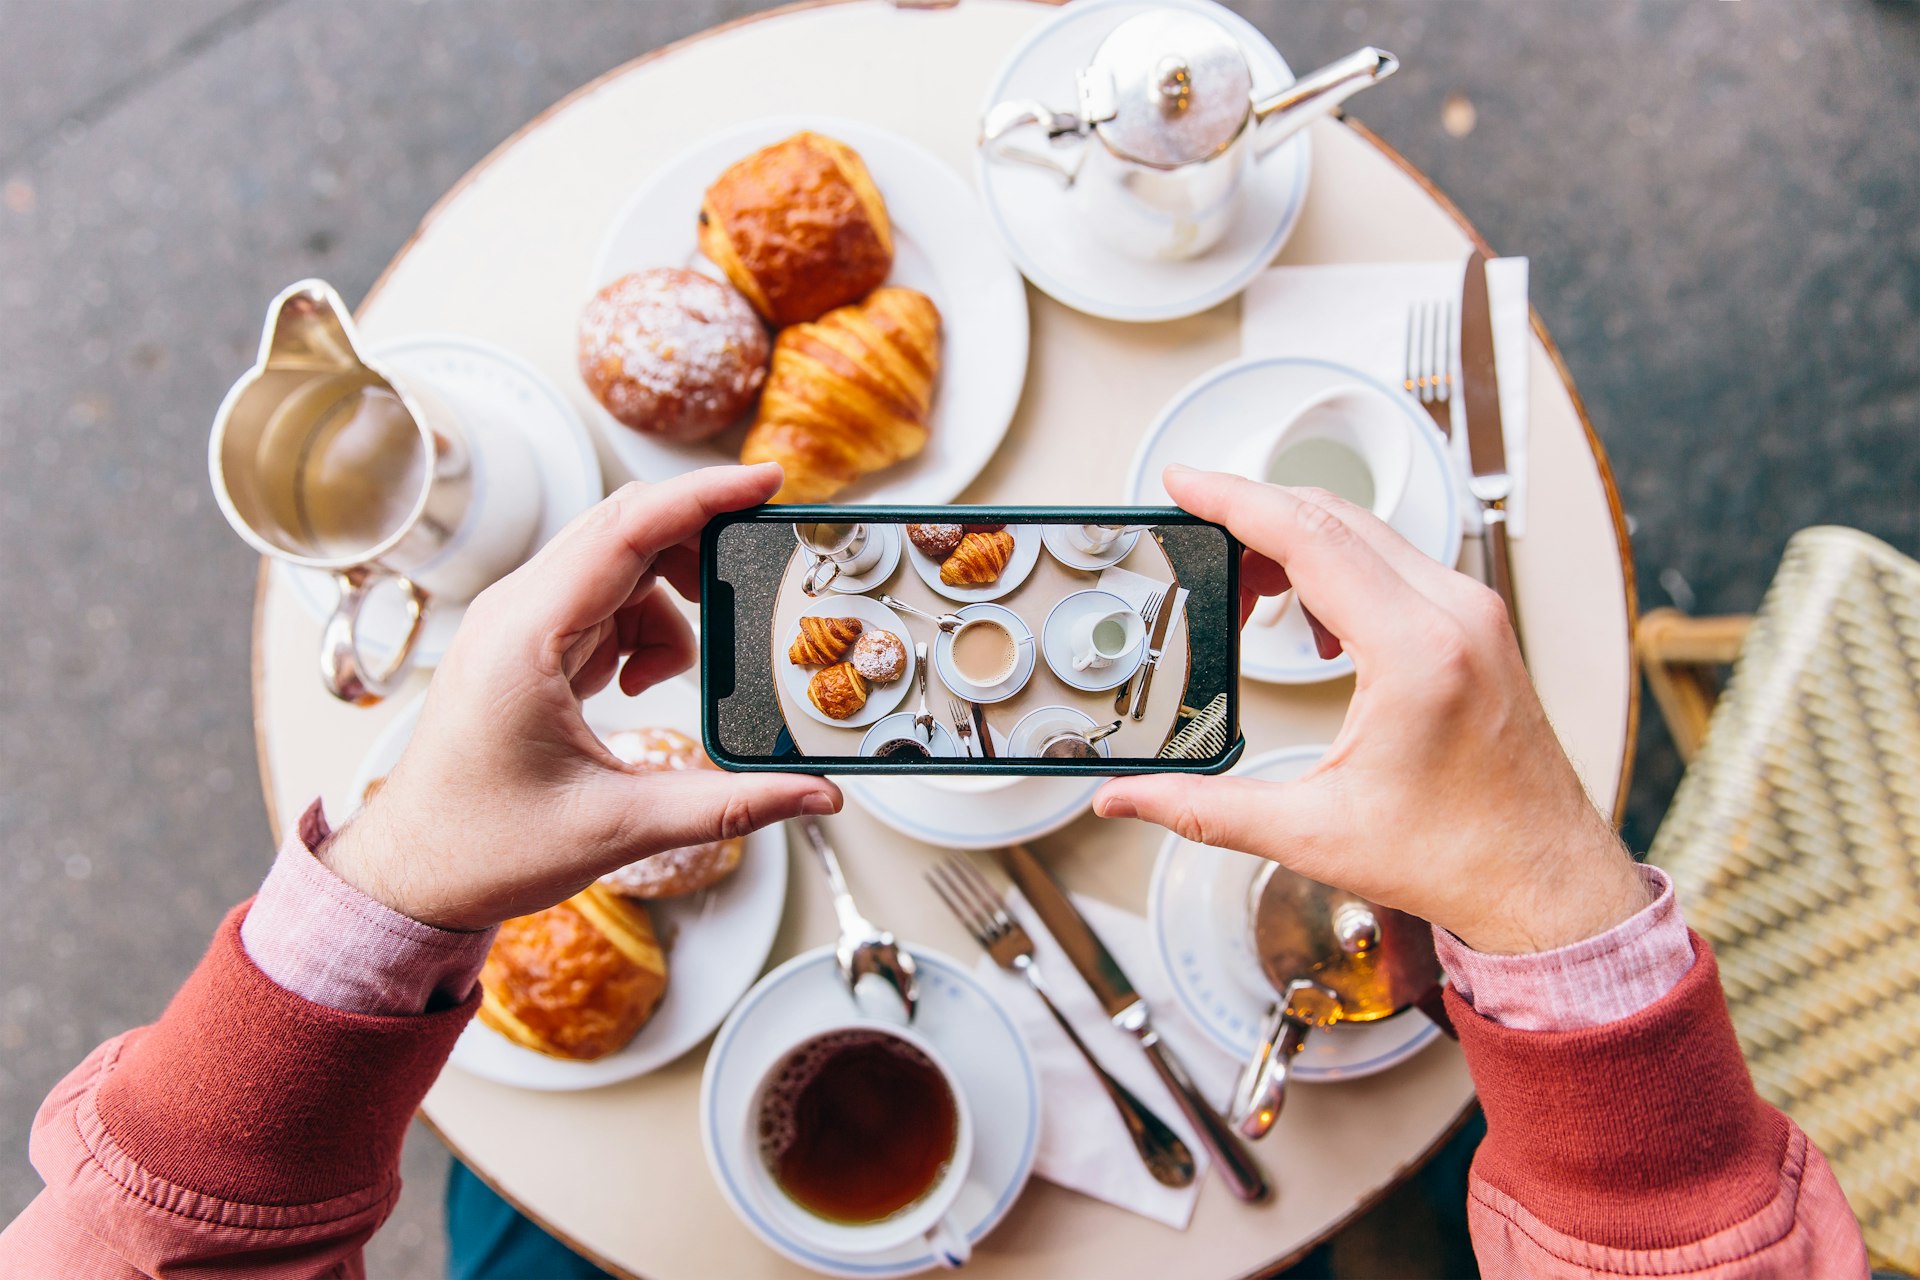 Young man photographing French breakfast with croissants on the table in sidewalk cafe in Paris, France